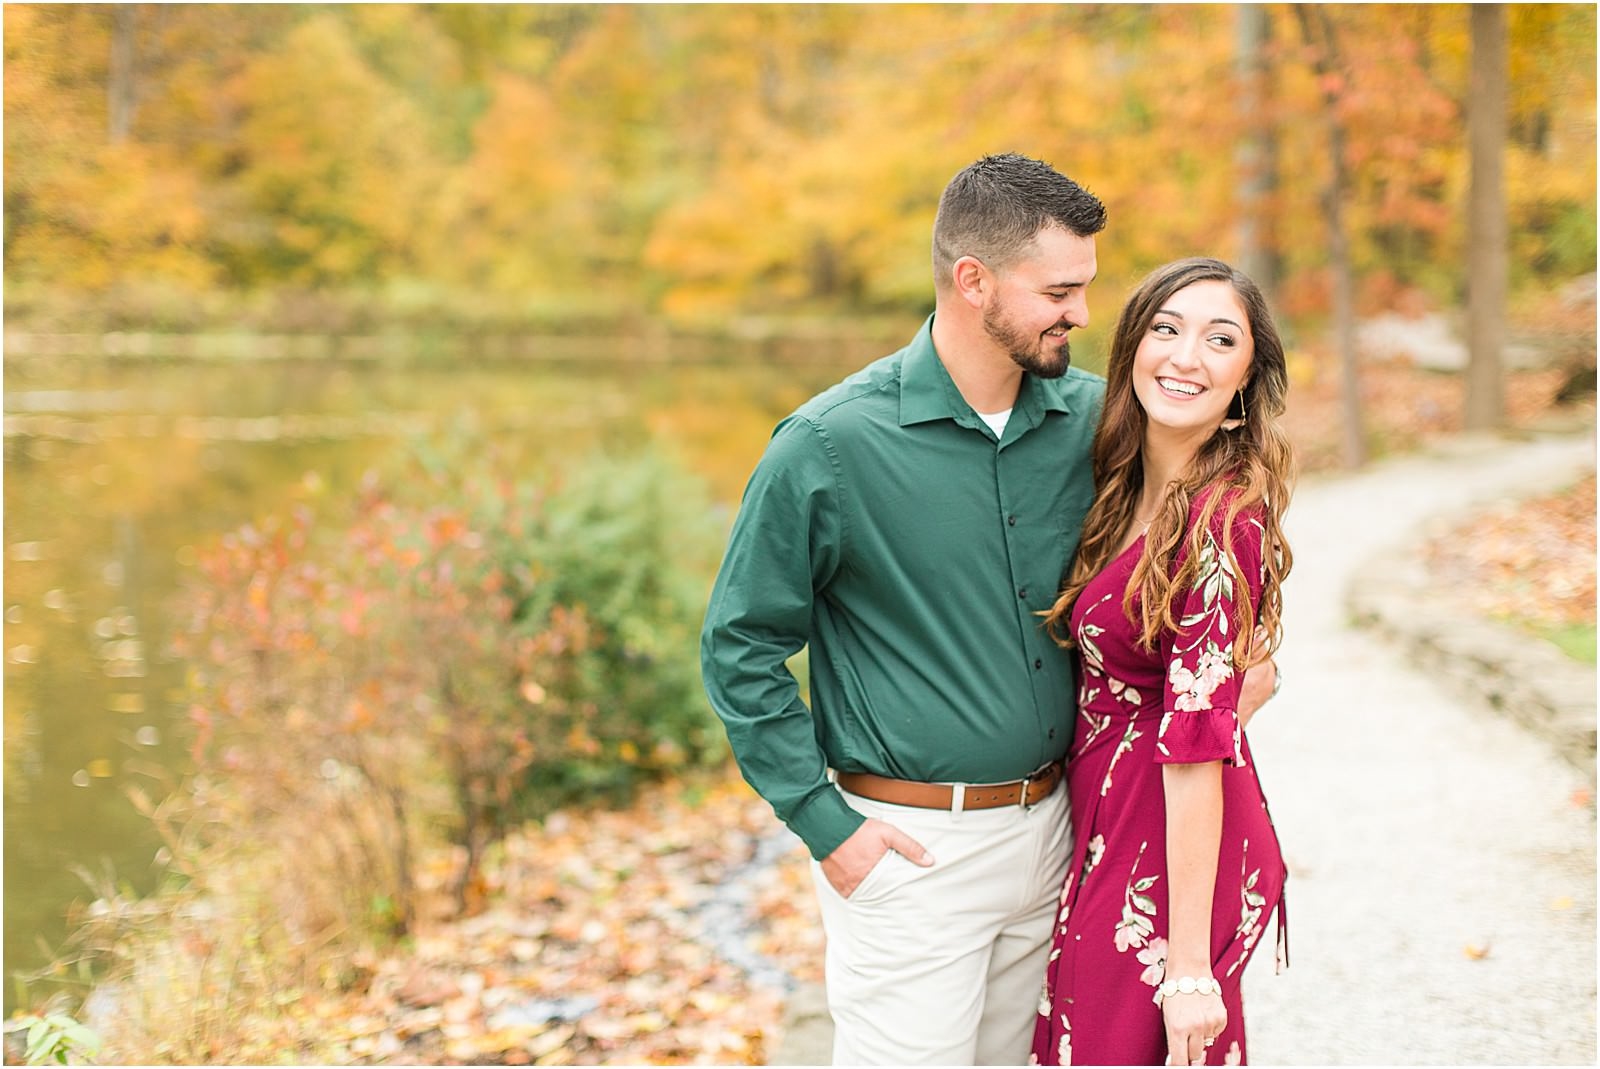 A Fall Oliver Winery Engagement Session | Sally and Andrew | Bret and Brandie Photography 0014.jpg